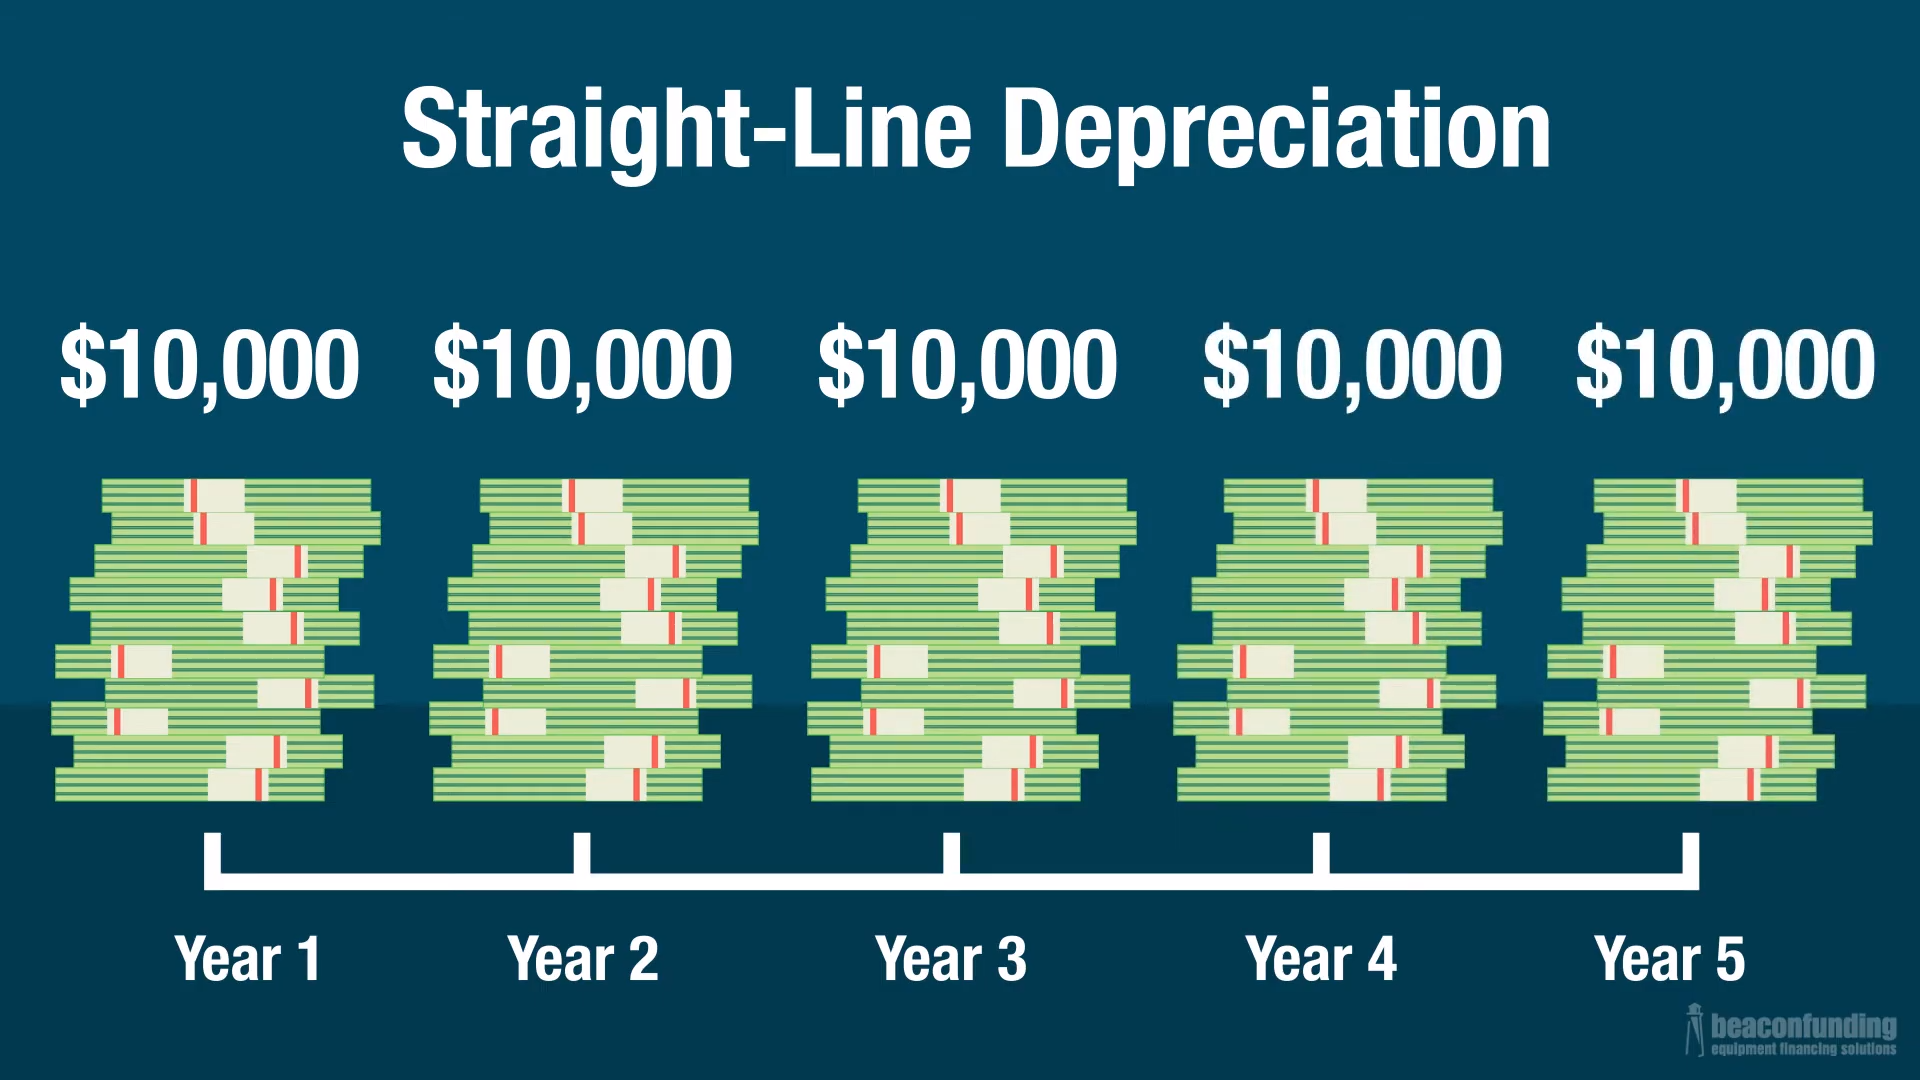 Example of a straight-line depreciation, where someone can write-off equal portions of their purchase price ($10,000 each year).